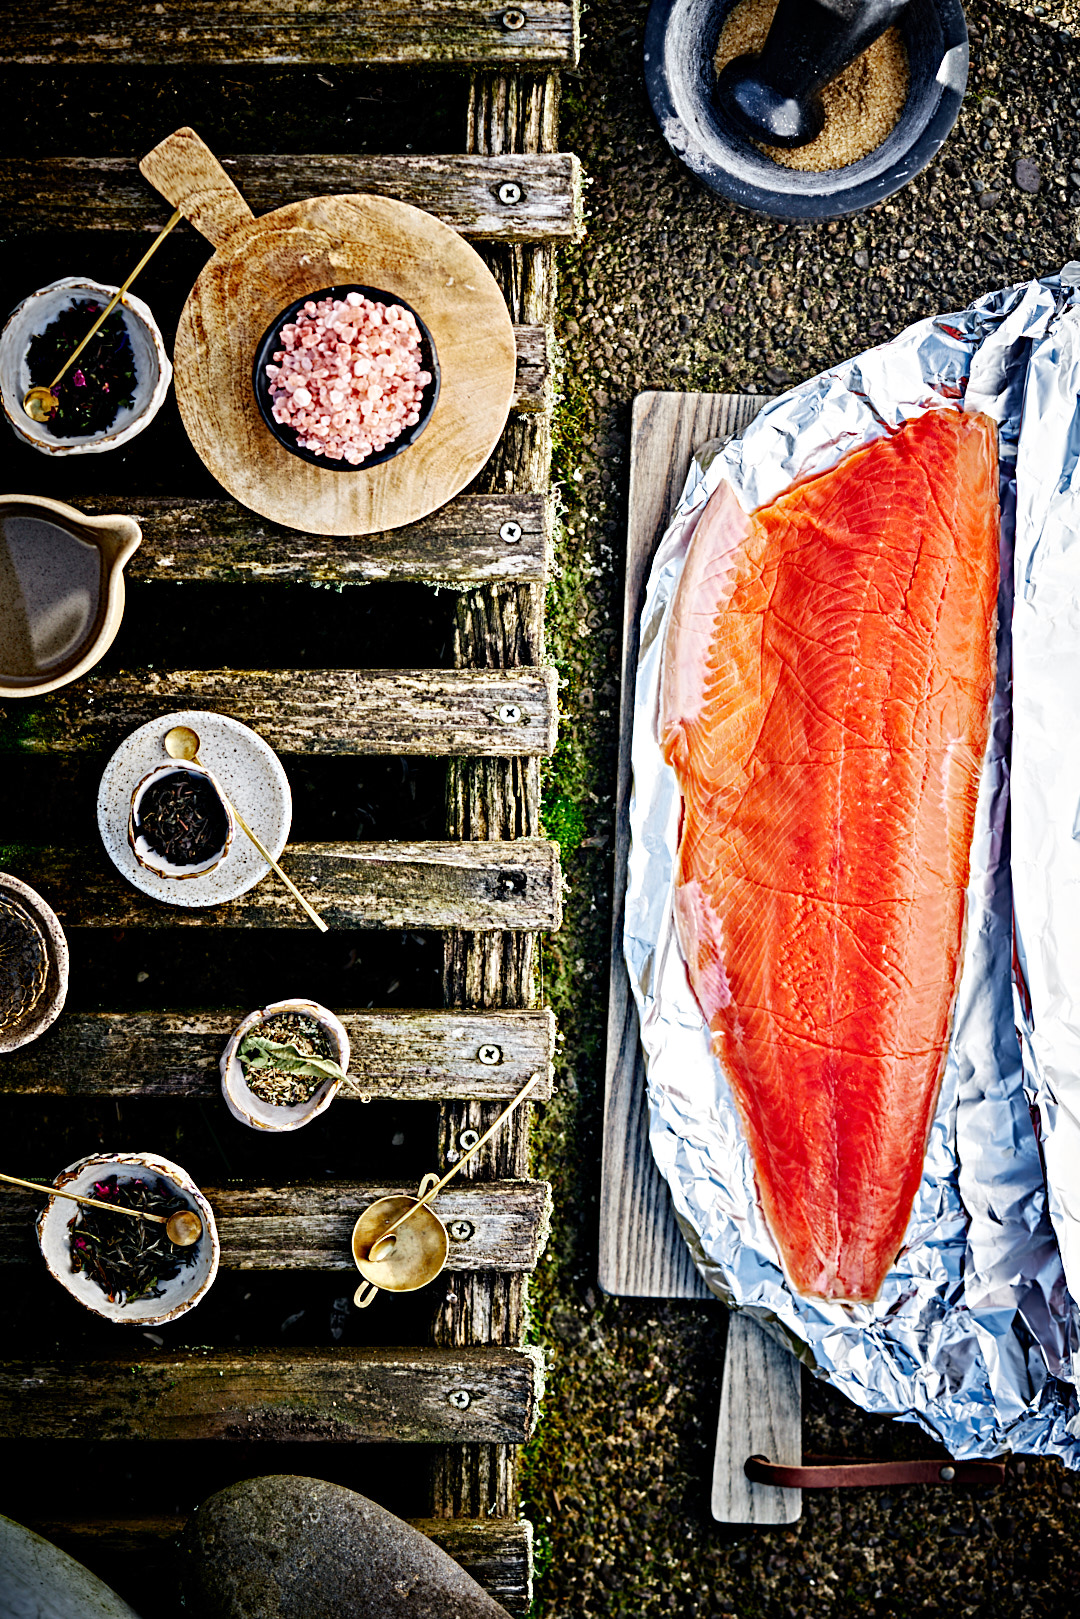 Small bowls of sugar, salt and tea leaves on a wooden bench next to a large fillet of salmon in foil.